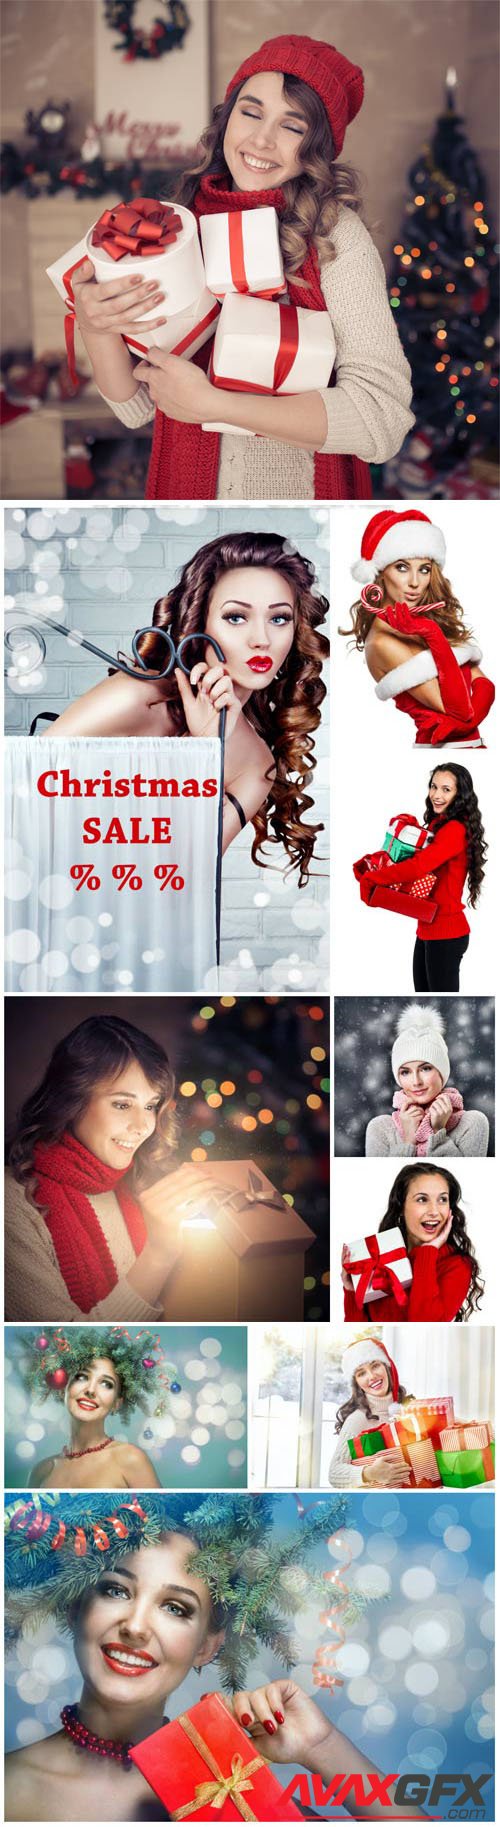 New Year and Christmas stock photos №44